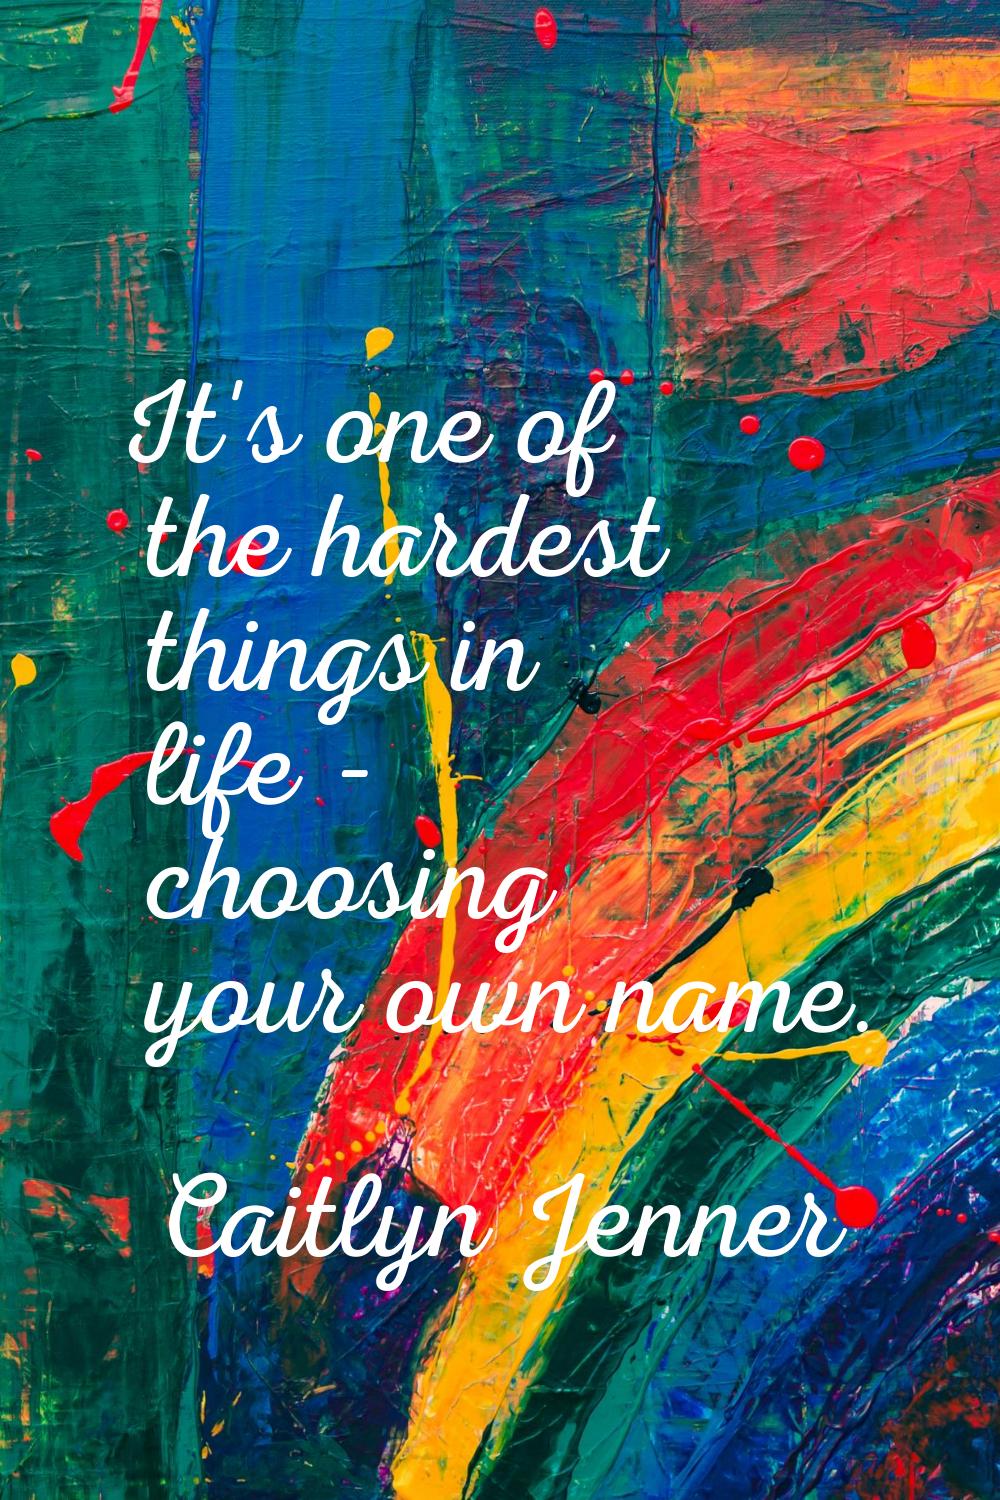 It's one of the hardest things in life - choosing your own name.